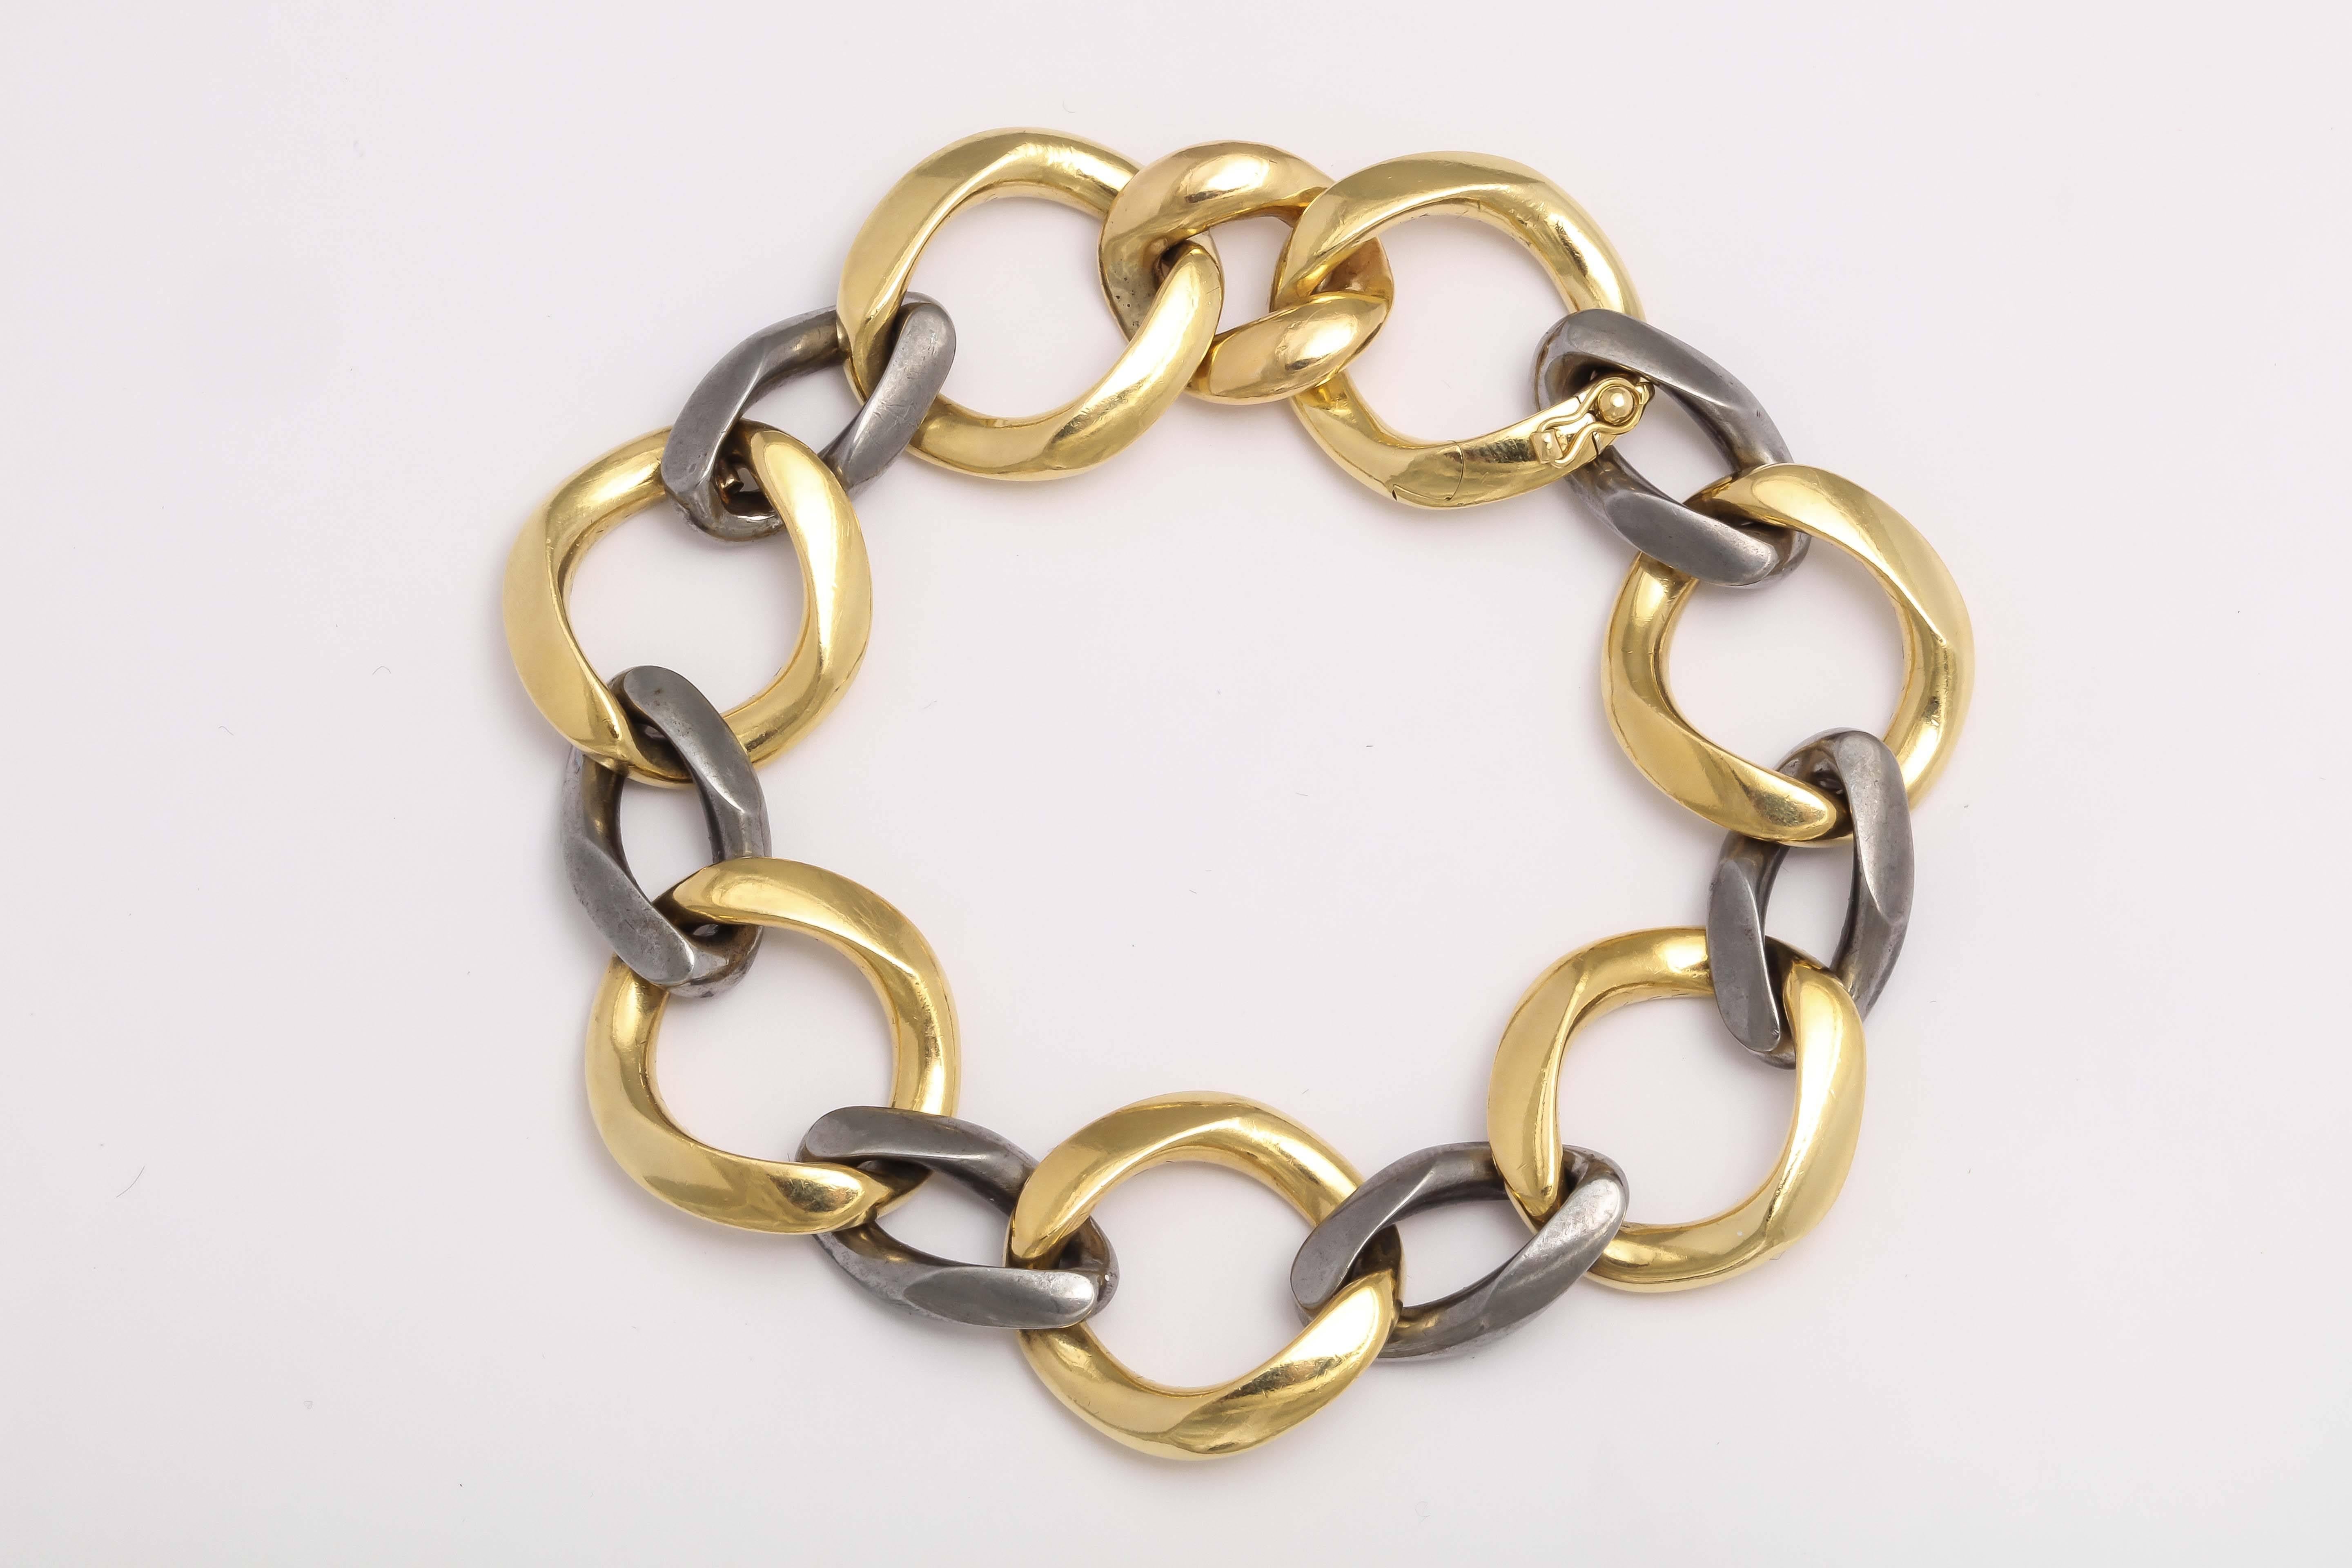 Ultra chic Bracelet with 8 - 18kt Yellow Gold Links attached by 6 Gun Metal Paper link shaped links to give a bold new look by the combination of metals.  Clasp is self closing link with safety.  Beautifully made. Marked 750 and 18kt Fred Paris.  So